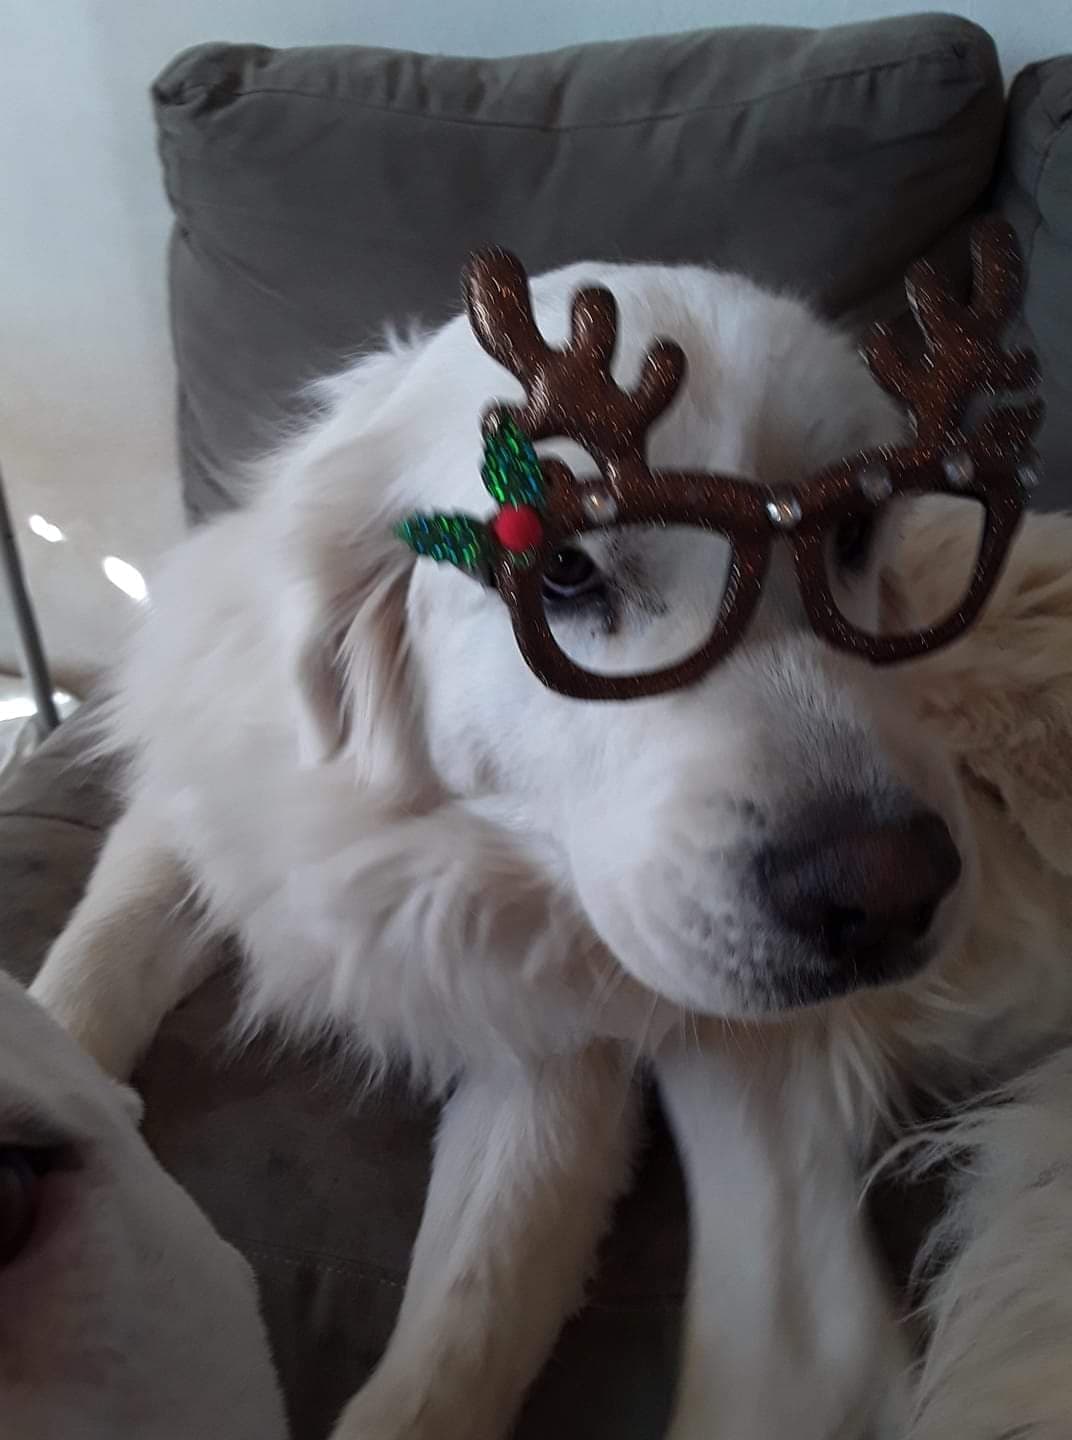 Emma is getting ready for Christmas! Happy Dogs CBD pbjdogs.com